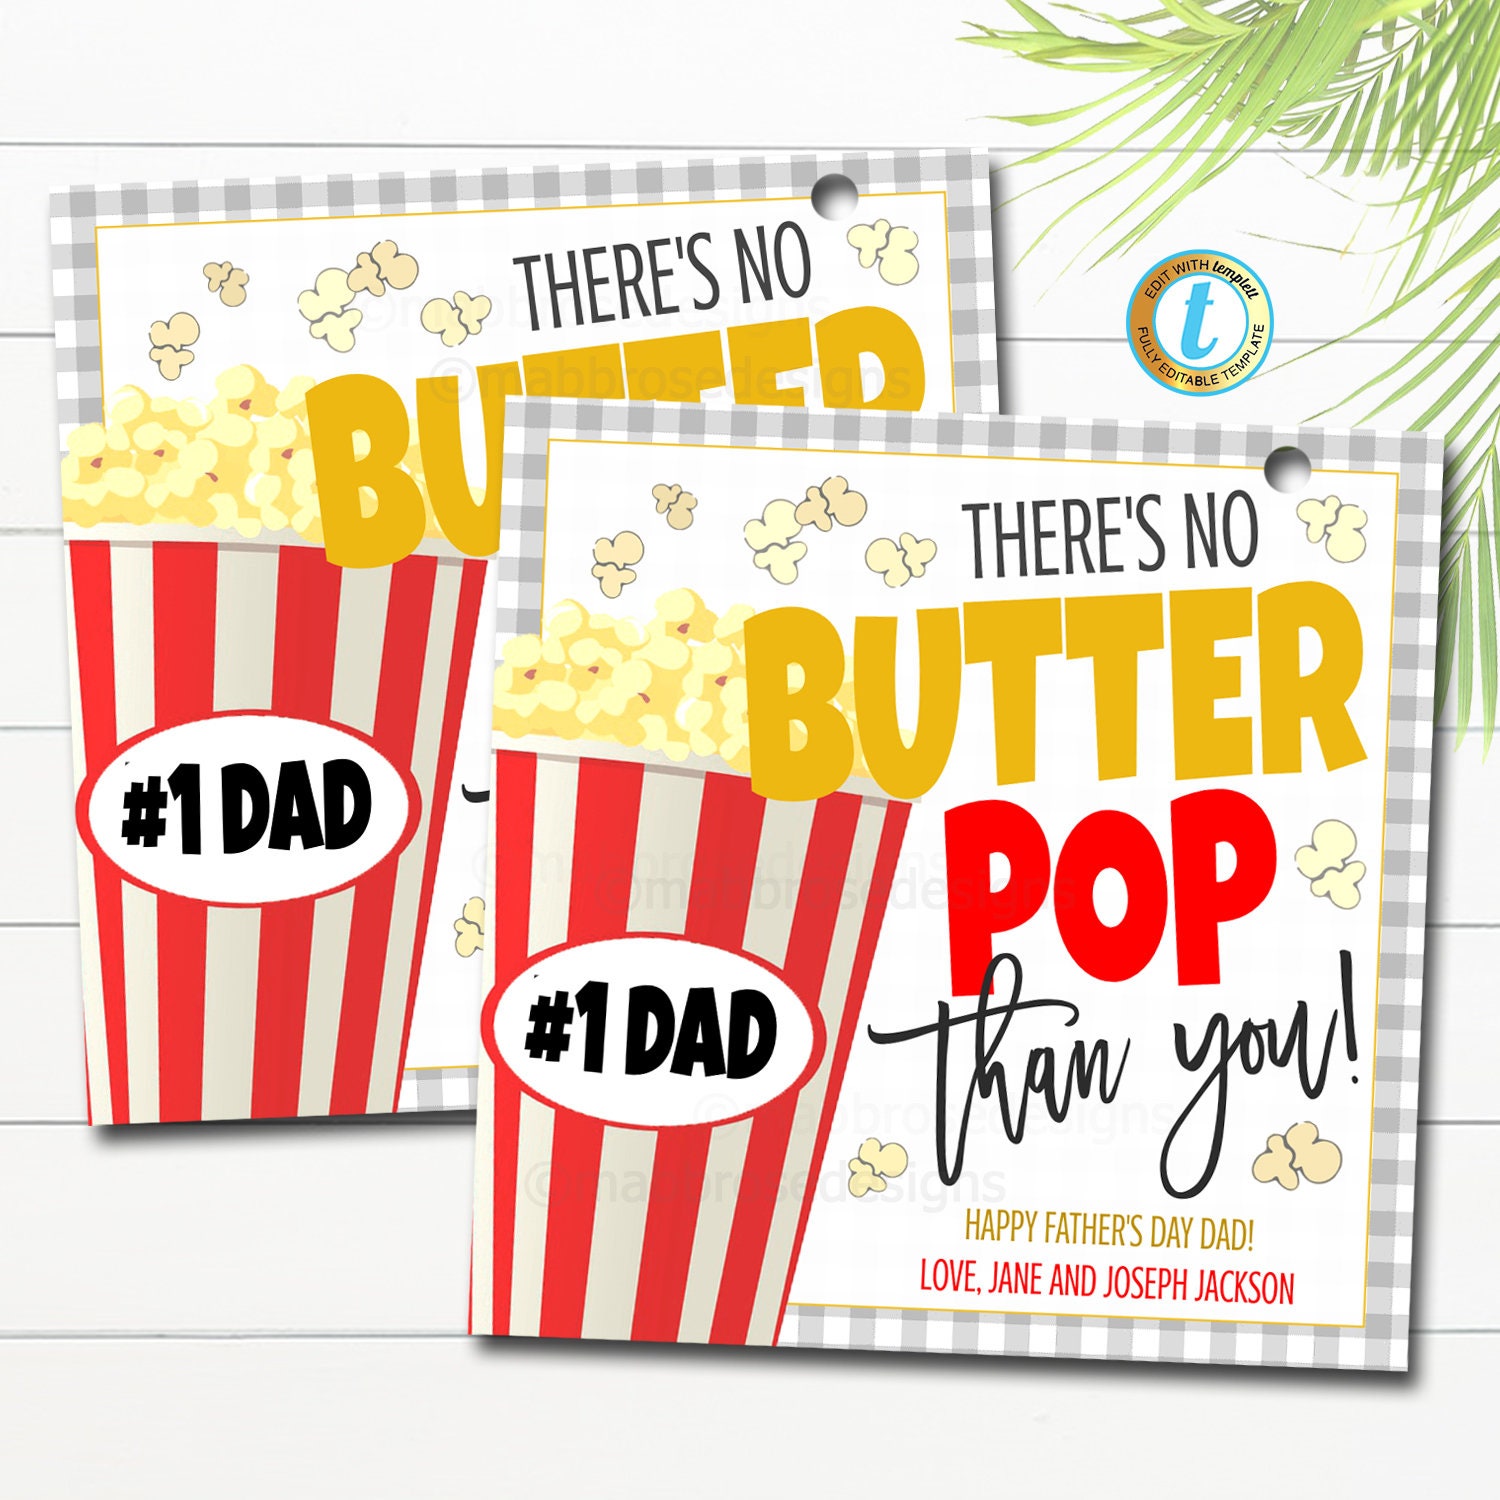 Fathers Day Gift Tags Church photo